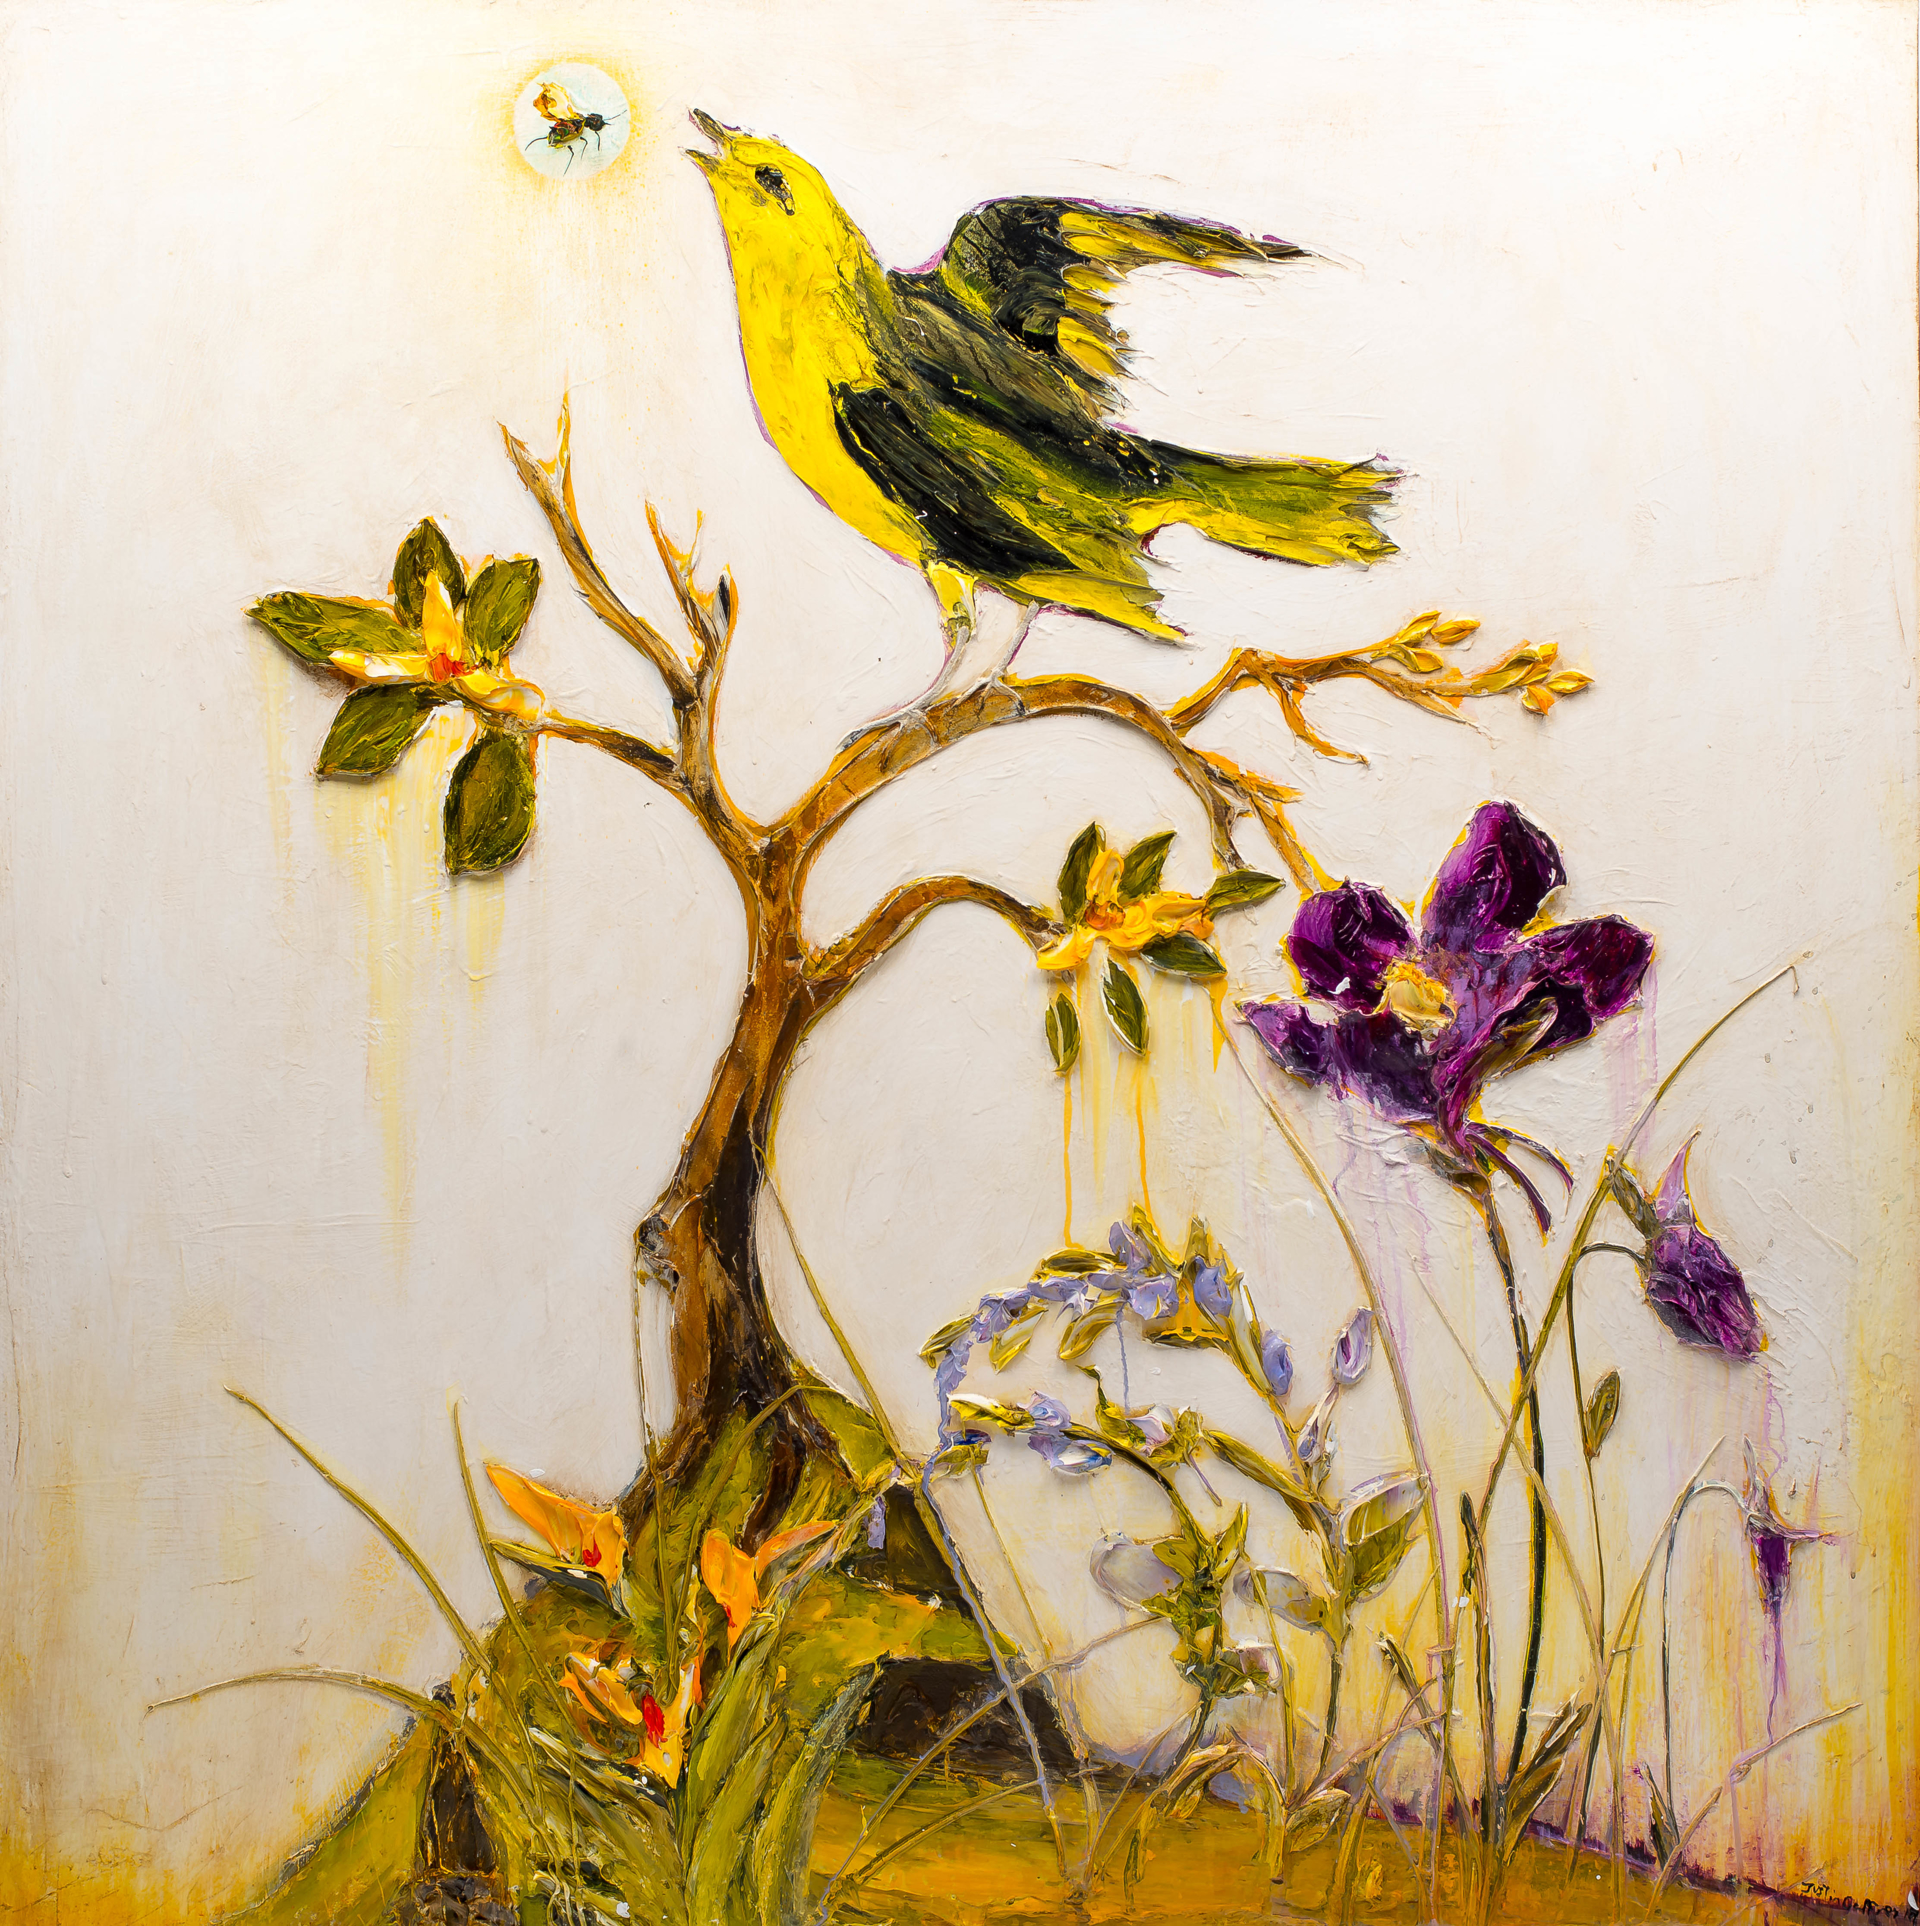 WILDFLOWERS, BIRD AND BEE by JUSTIN GAFFREY